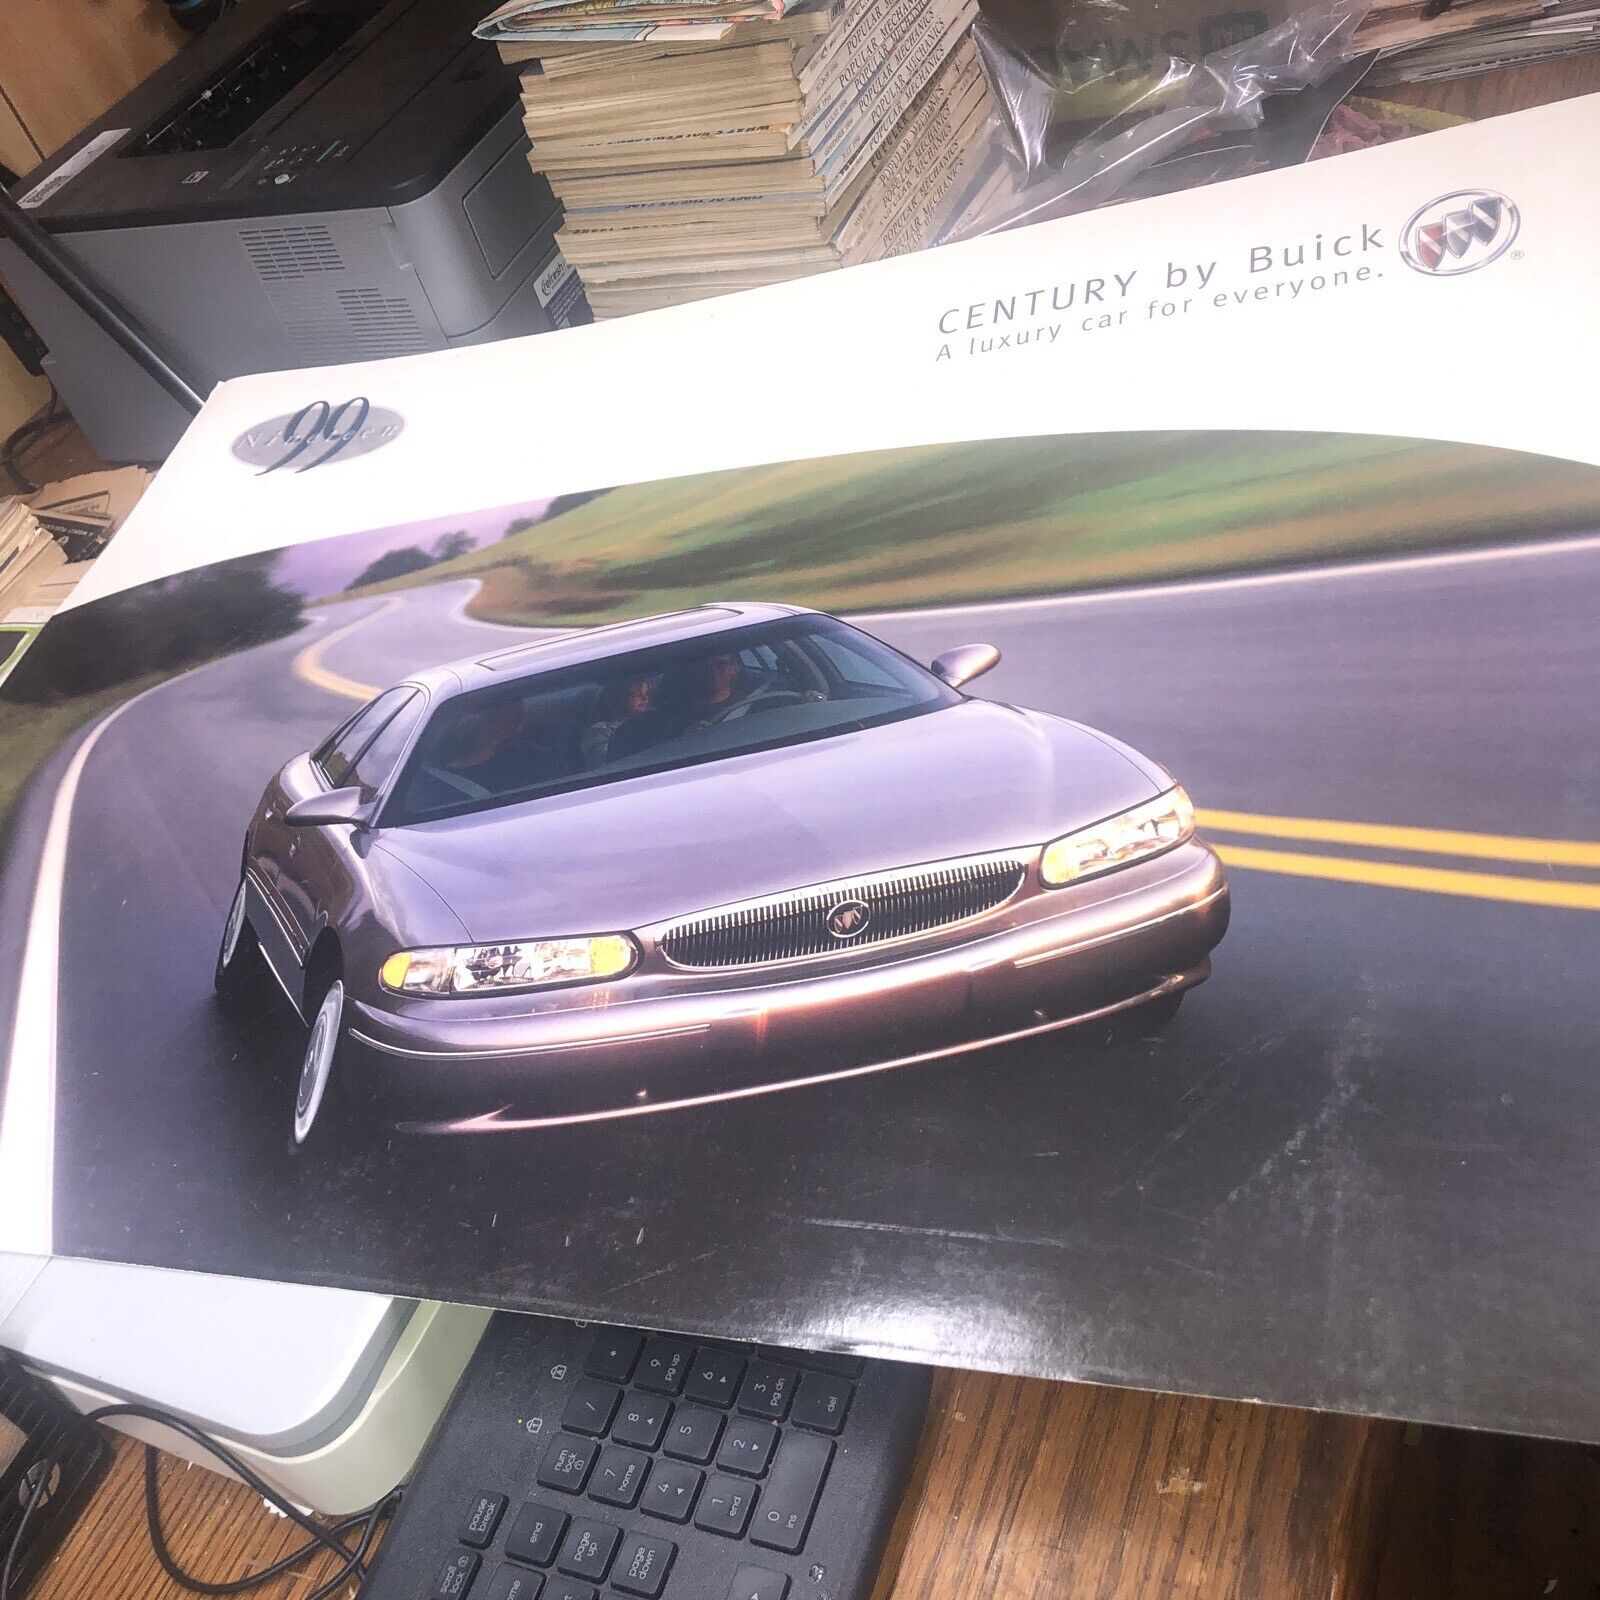 1999 Buick Park Avenue Dealer Poster Board Sign Wall Display 22x30